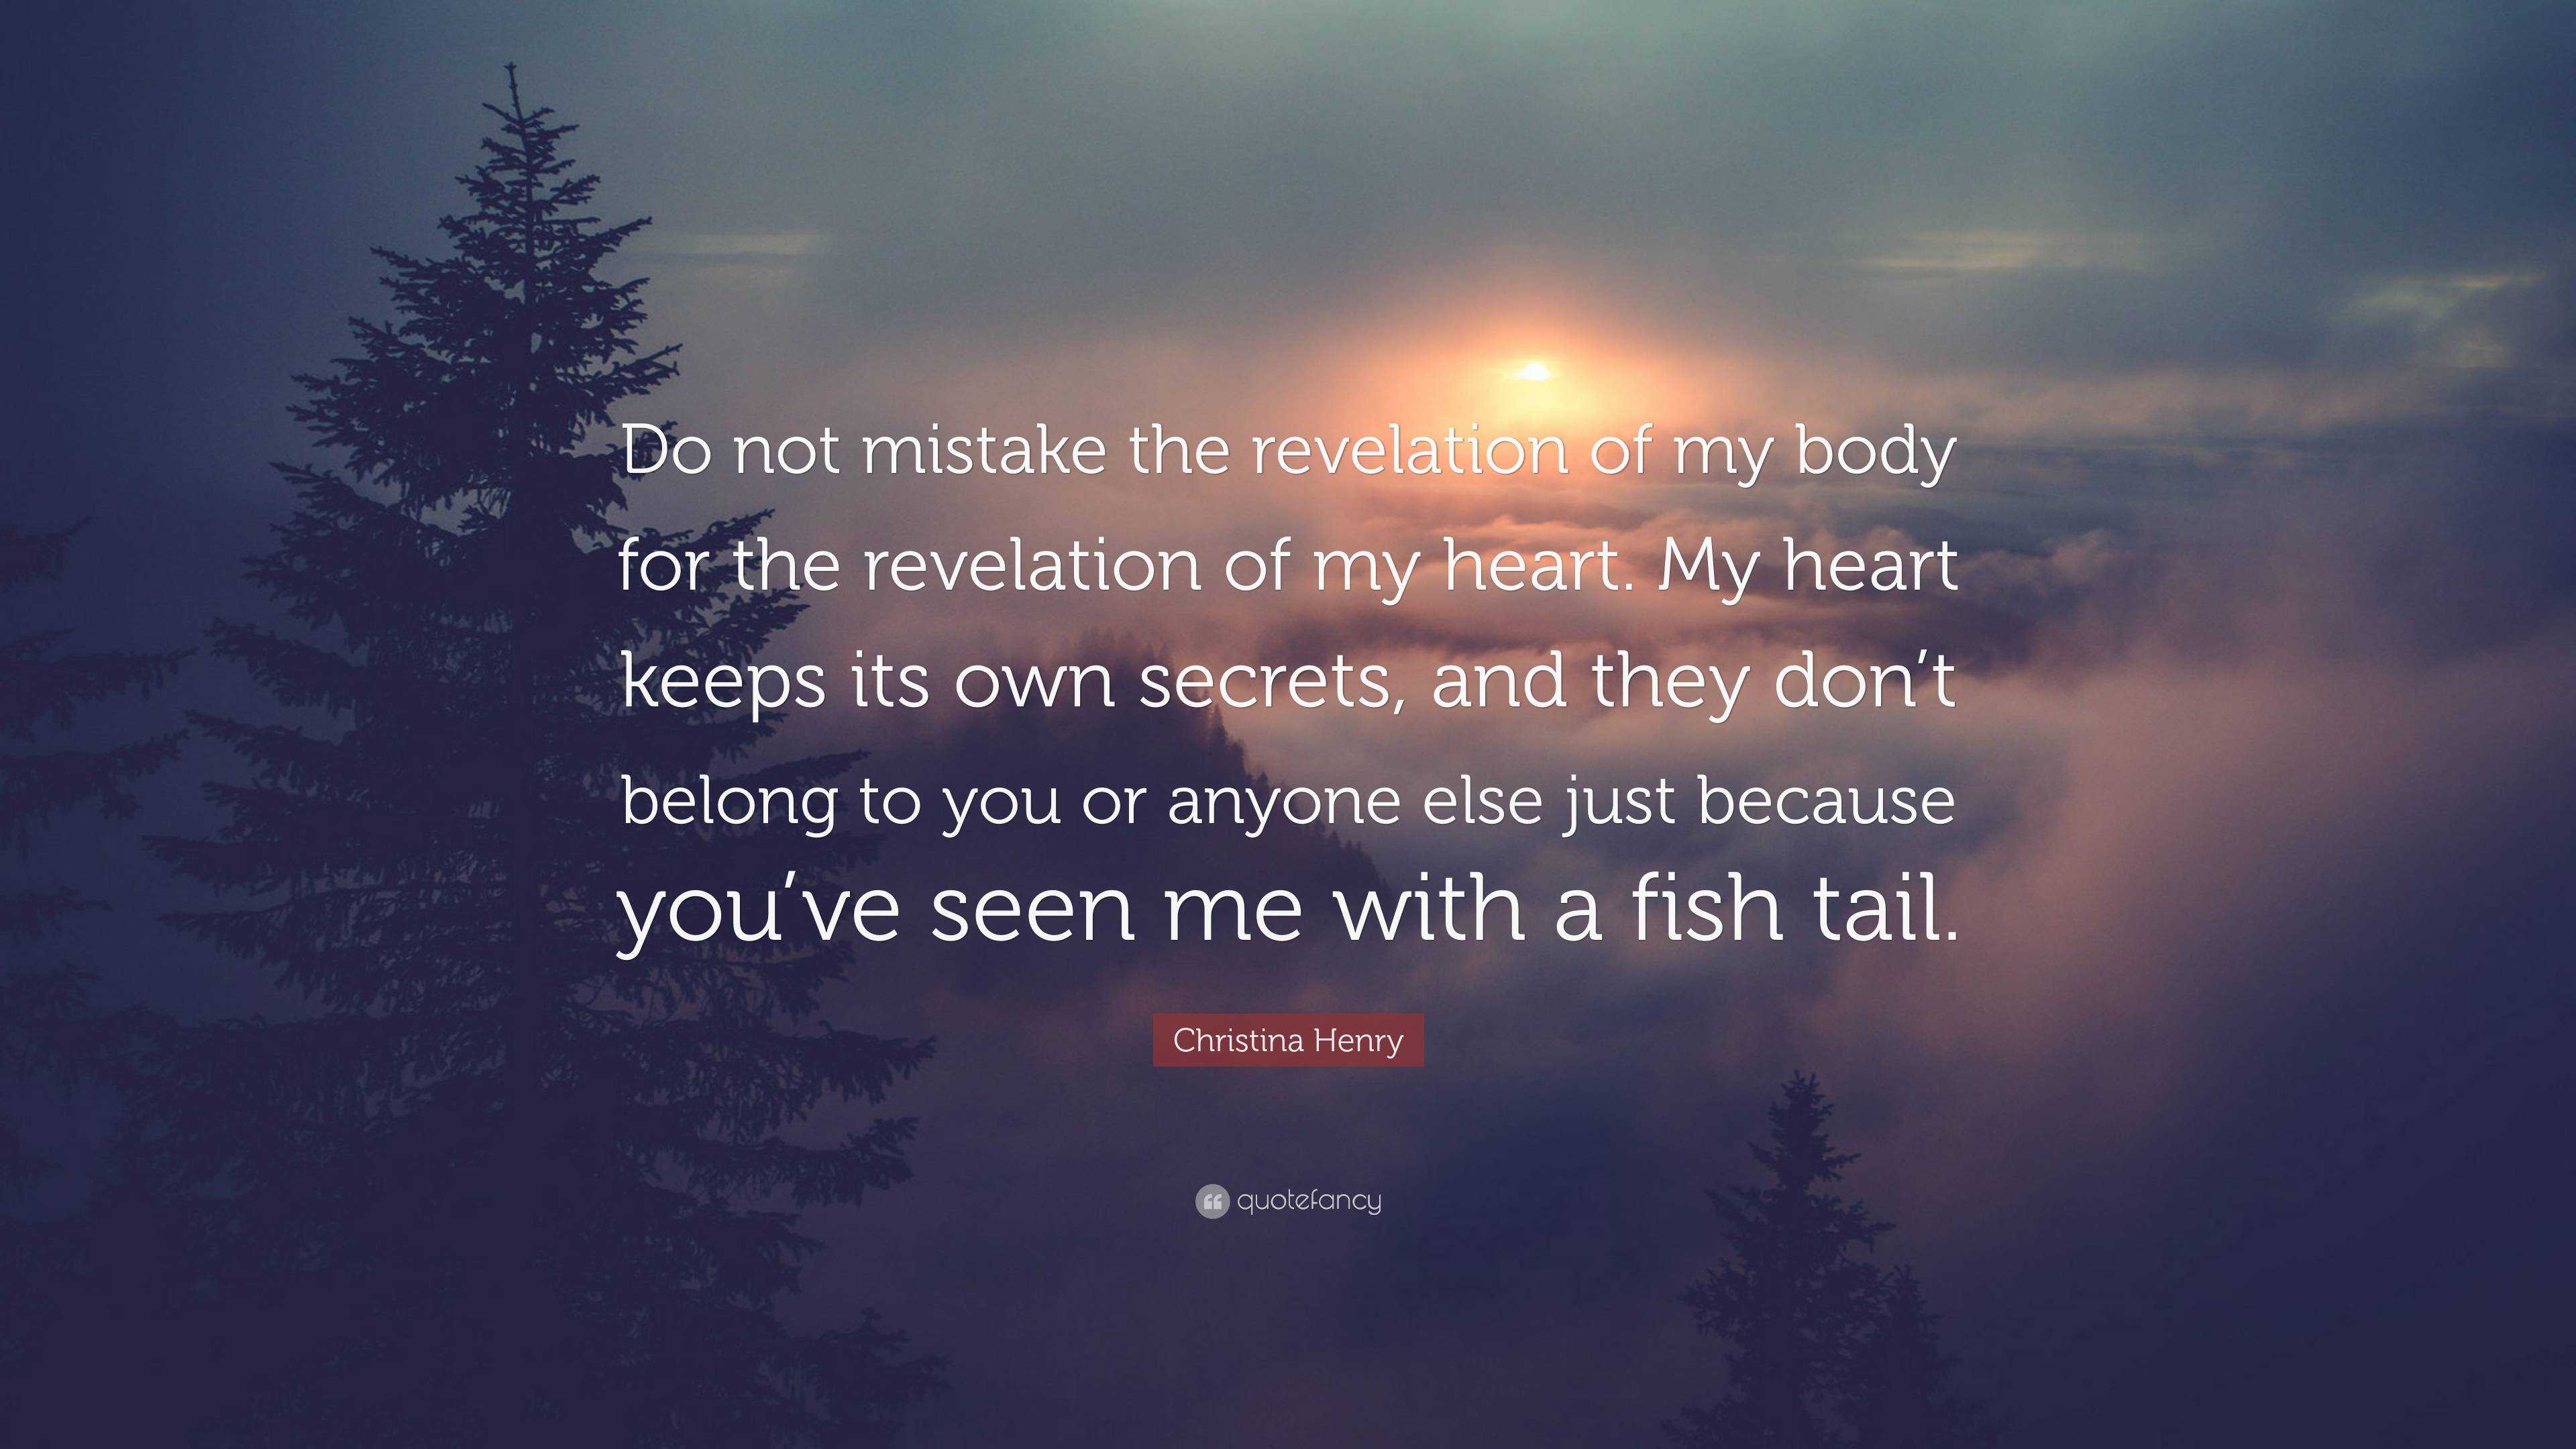 Christina Henry Quote: “Do not mistake the revelation of my body